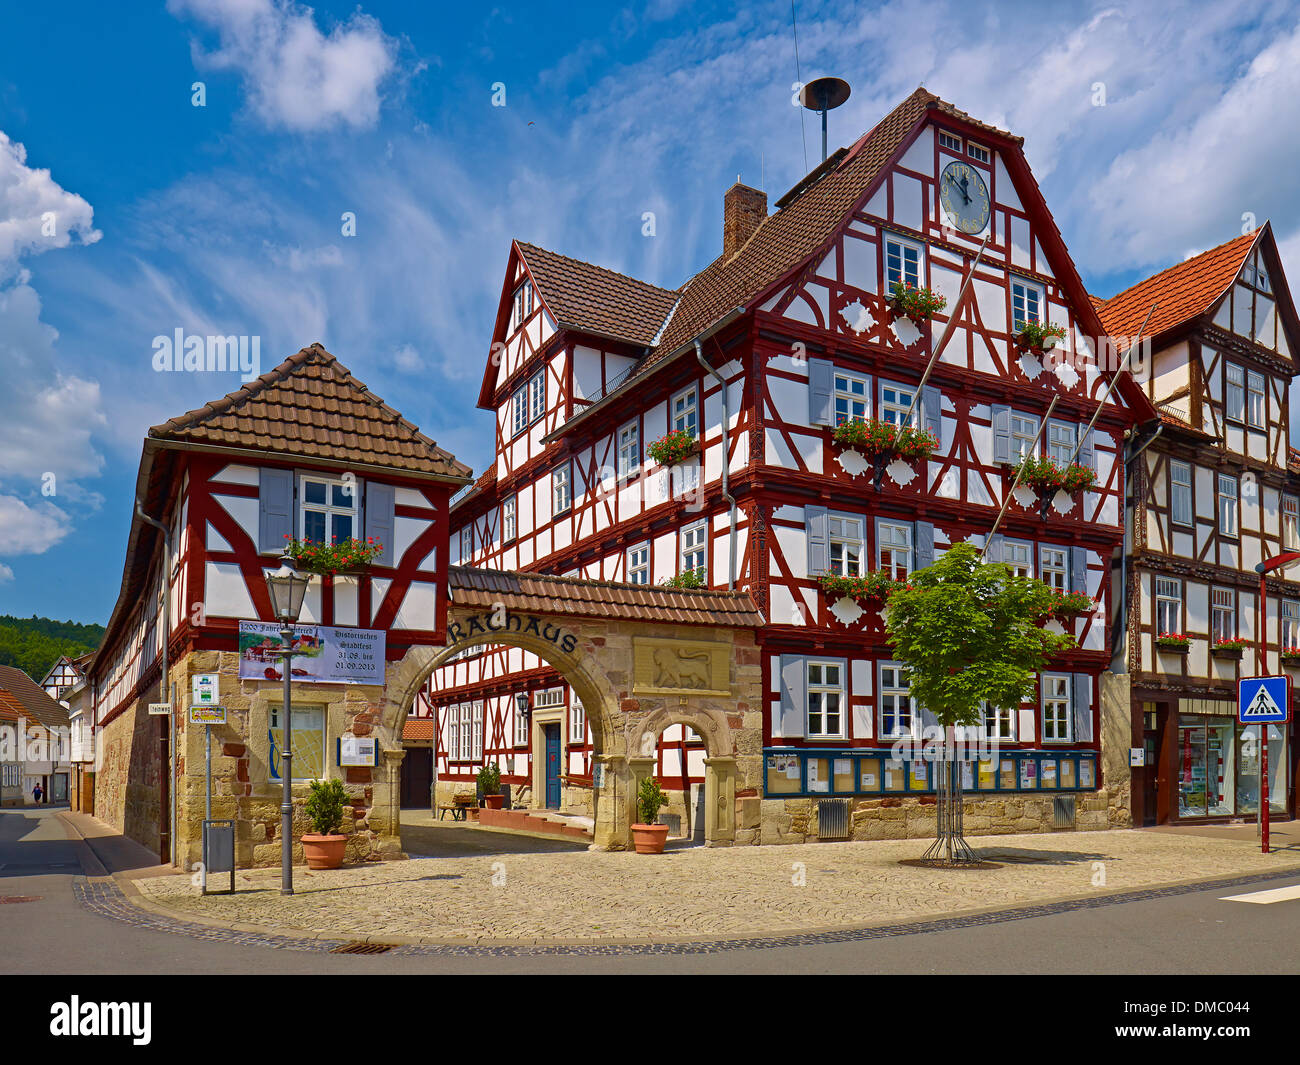 Town Hall in Wanfried, Werra-Meissner district, Hesse, Germany Stock Photo